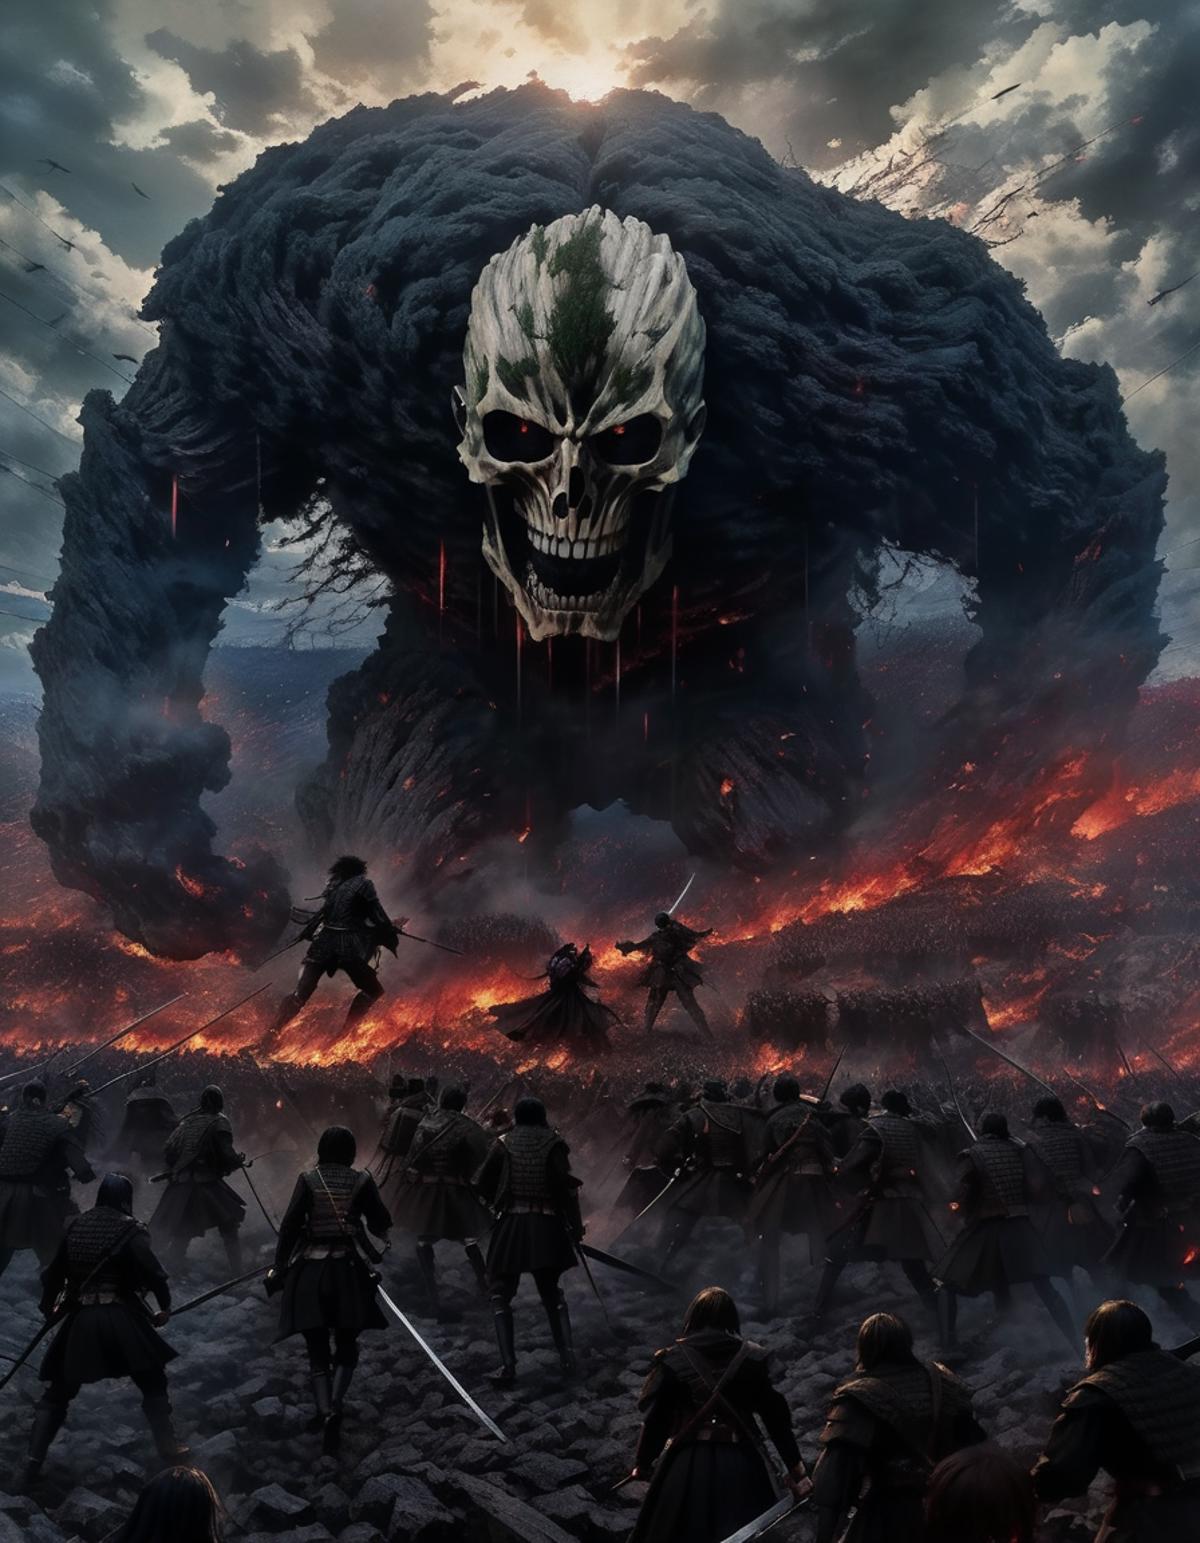 A group of fighters facing a monster with a skull face.